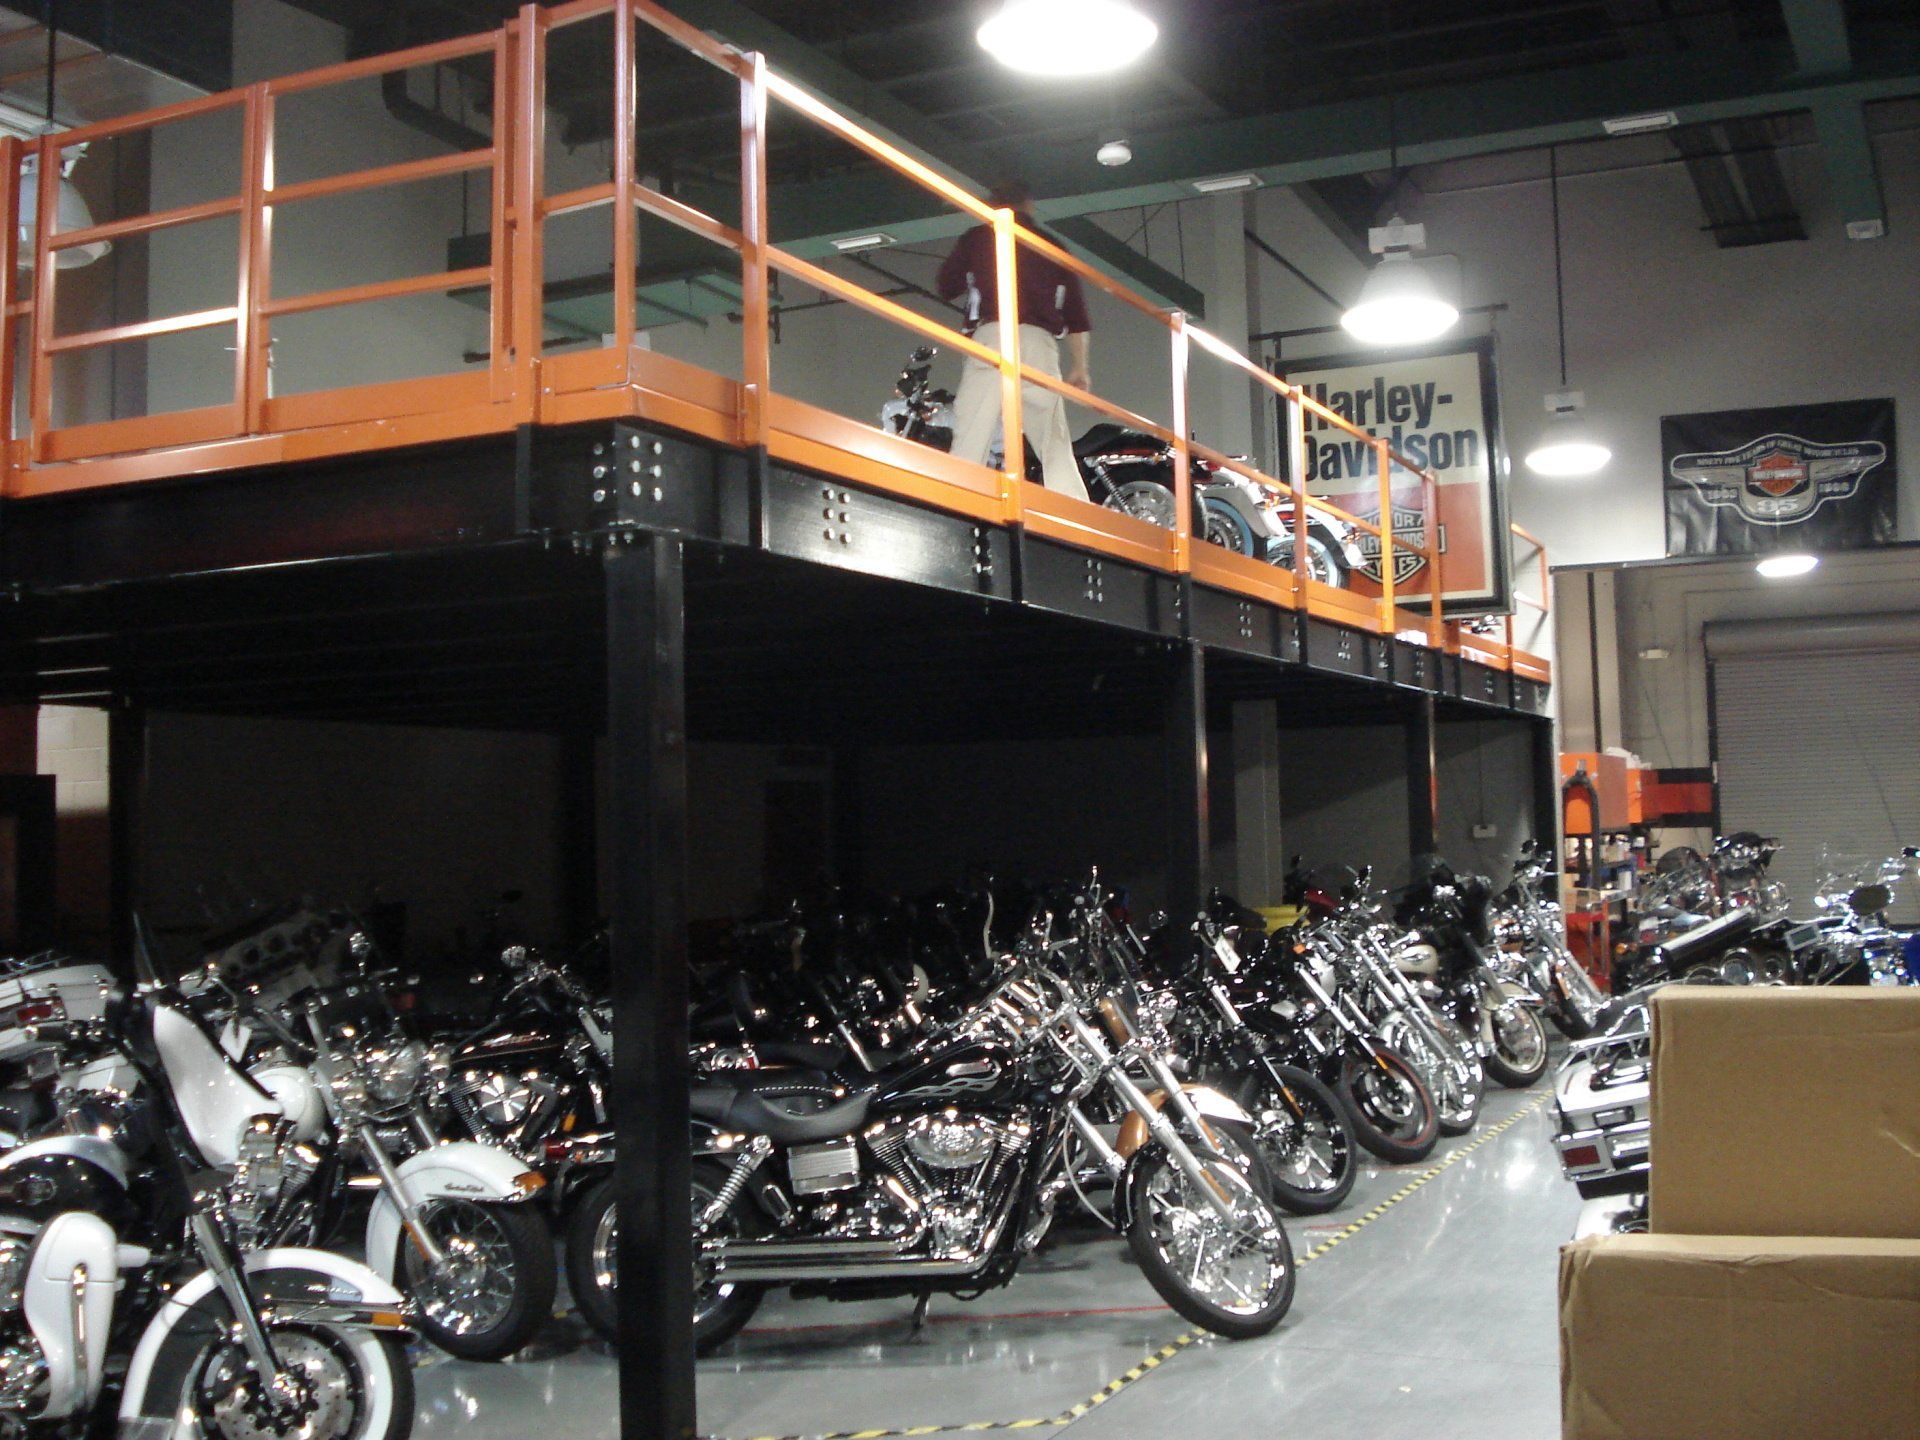 Free standing mezzanine system installed to create second level storage of Harley Davidson Motorcycles